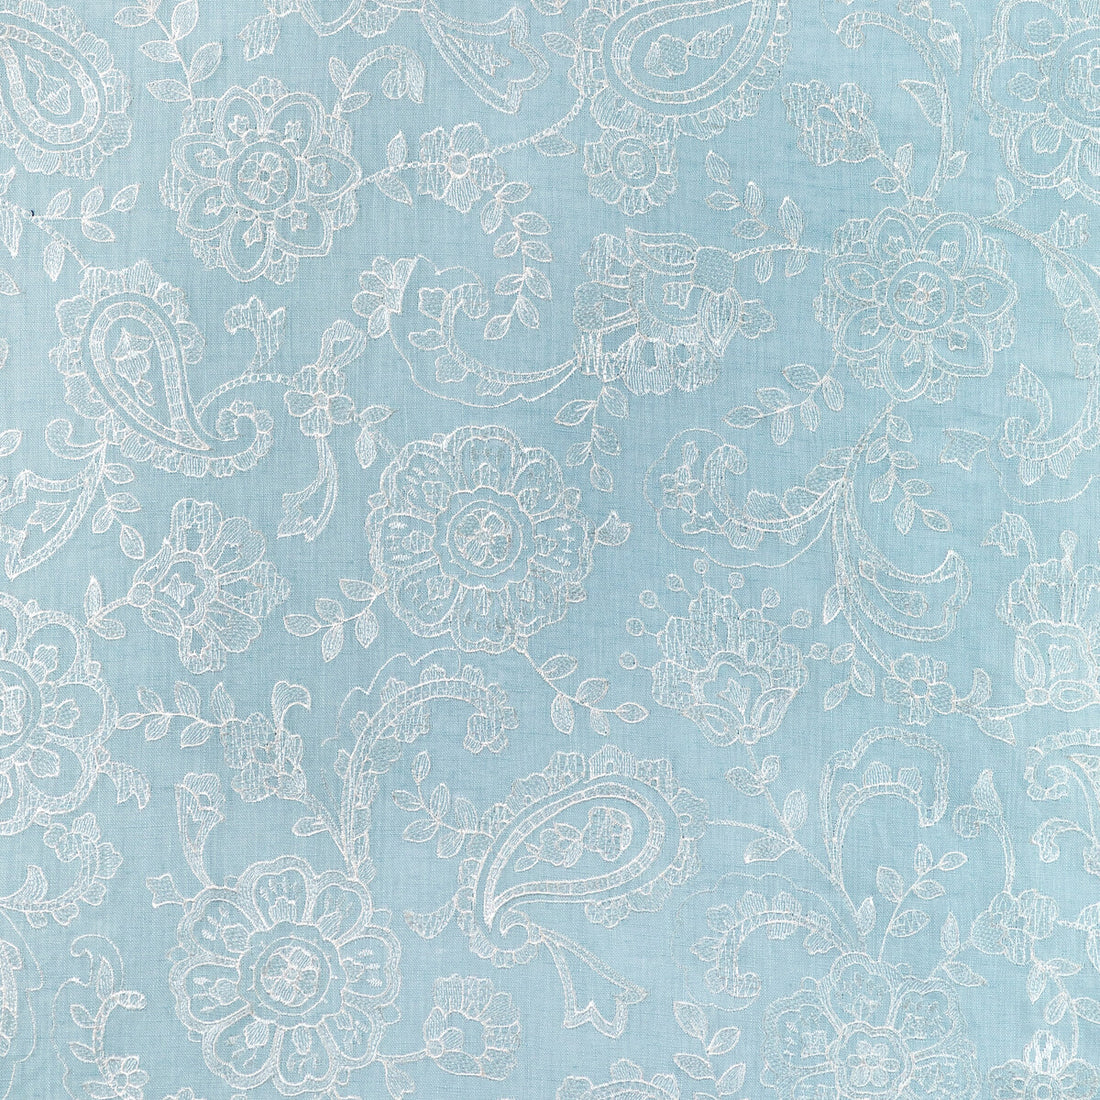 Varley Sheer fabric in sky color - pattern 2021128.15.0 - by Lee Jofa in the Summerland collection